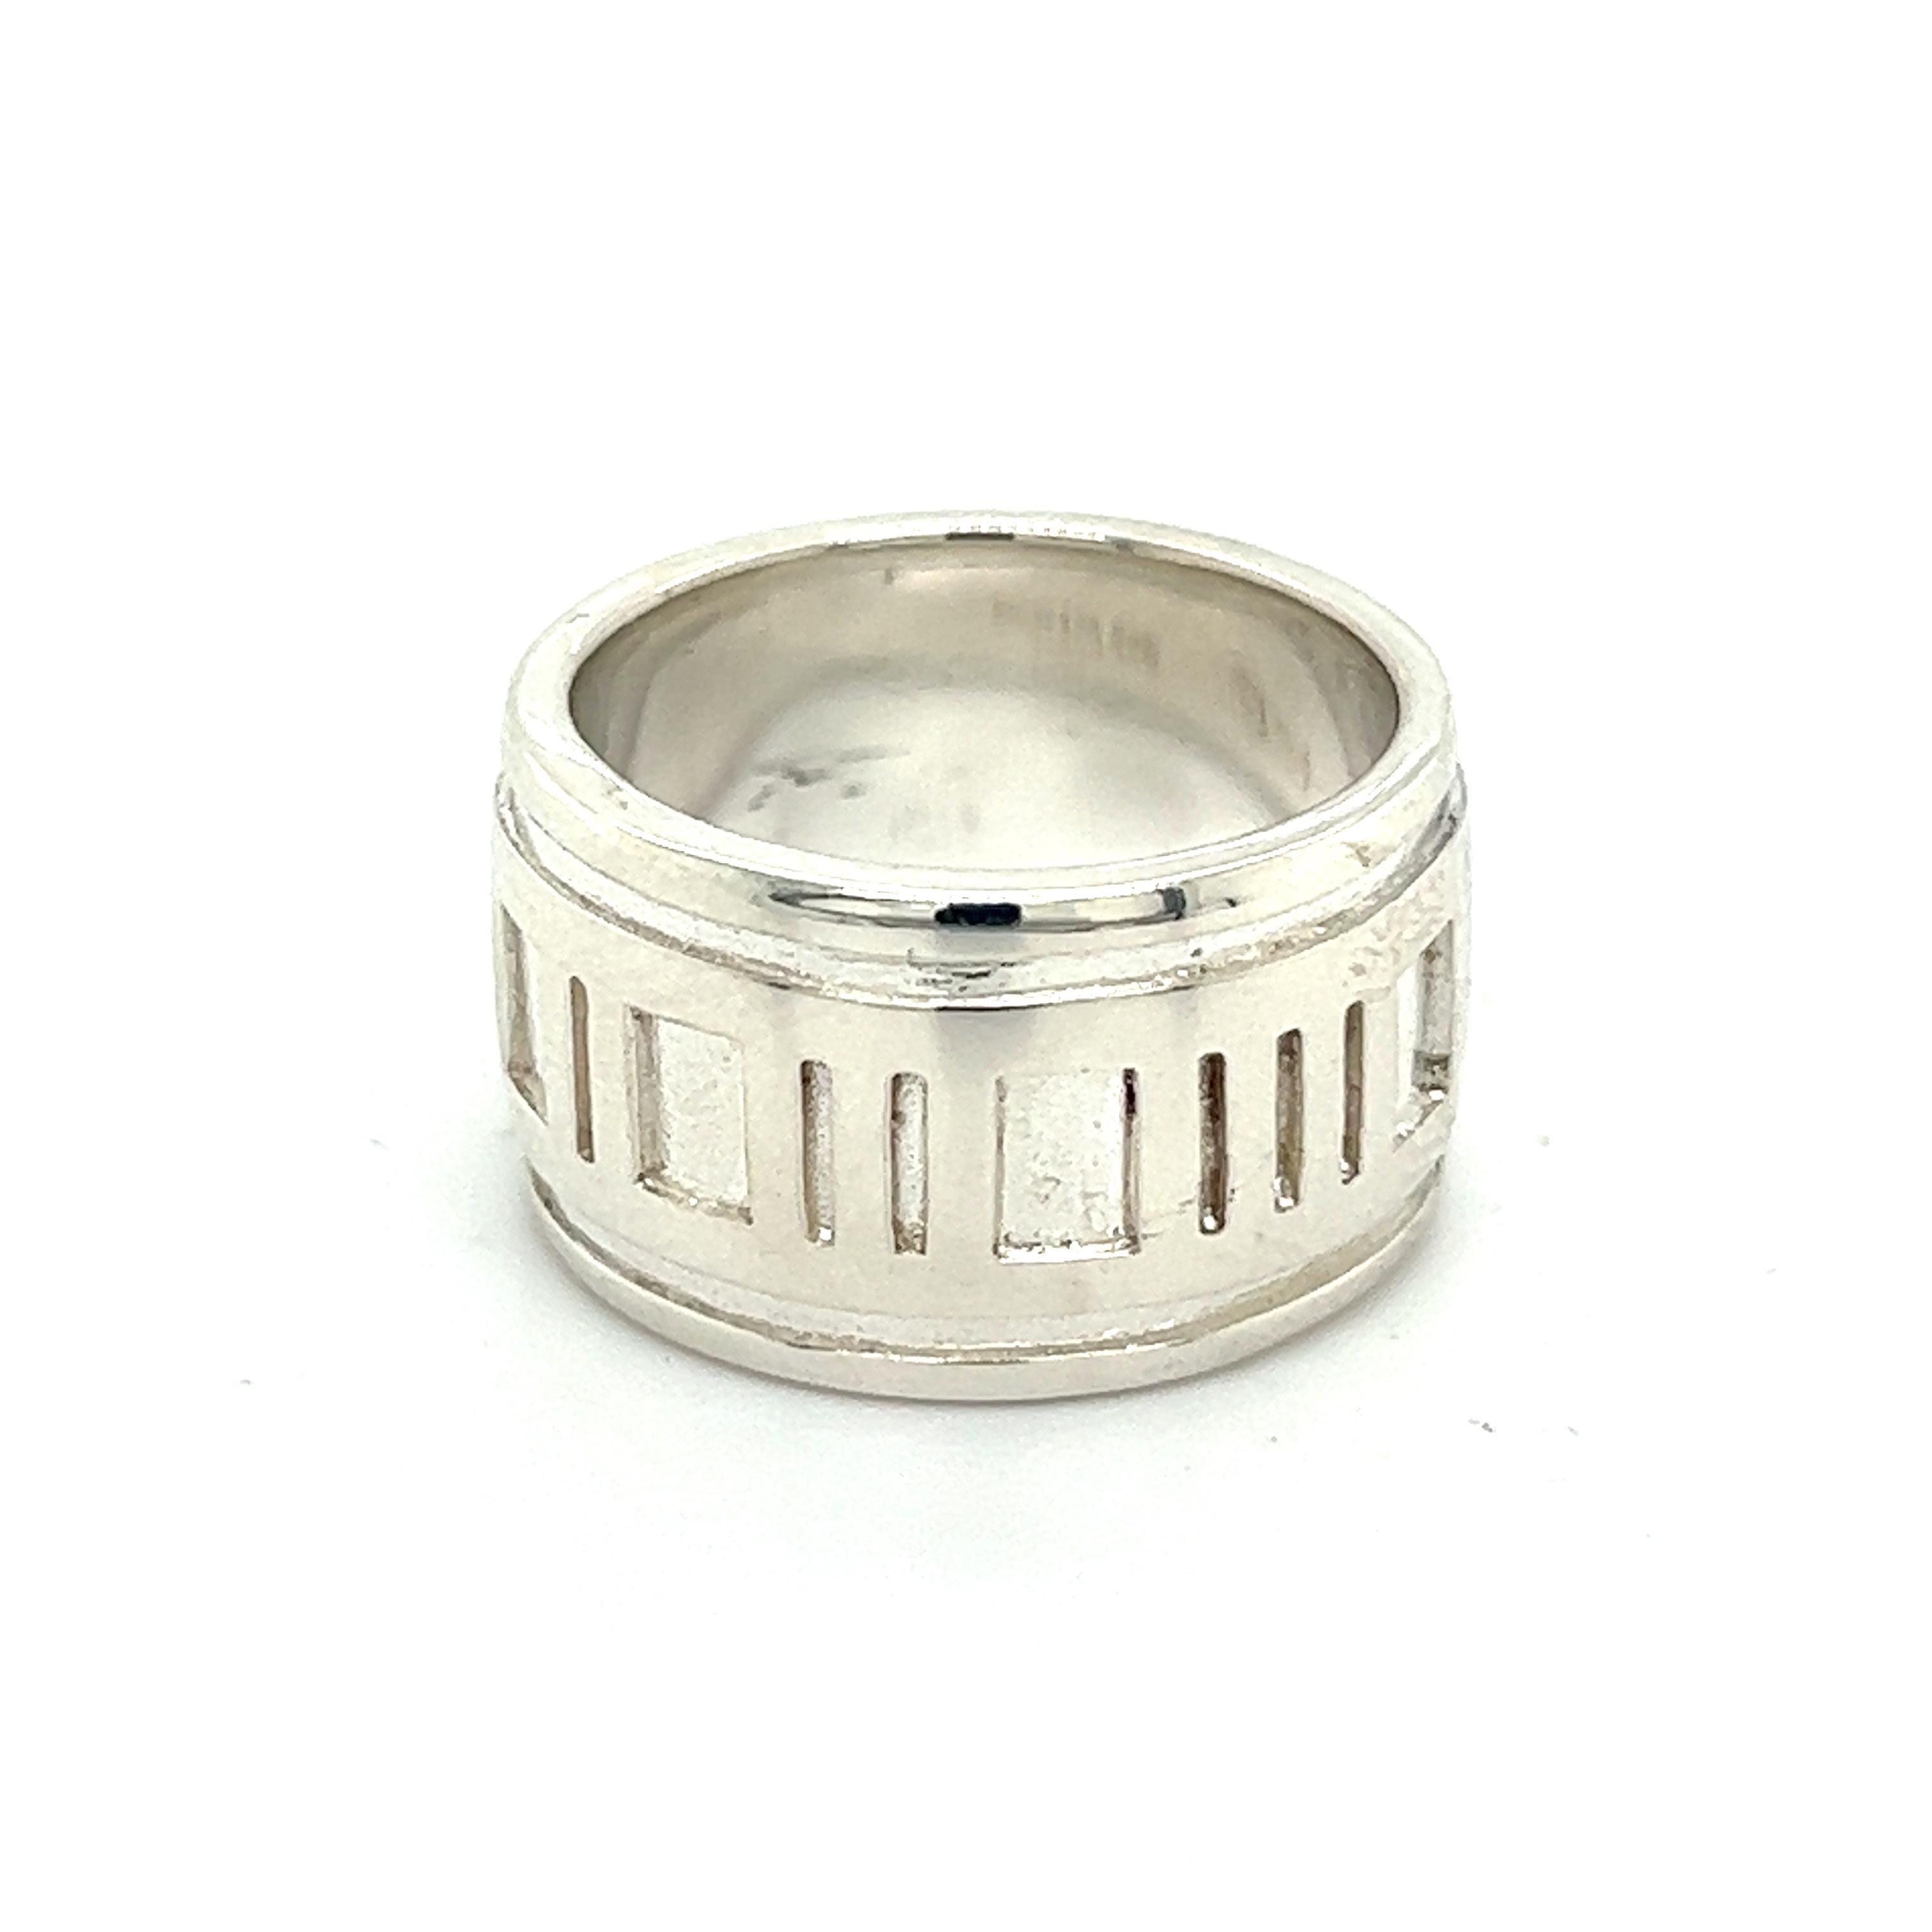 Tiffany & Co Estate Atlas Ring Size 5.25 Silver 11 mm In Good Condition For Sale In Brooklyn, NY